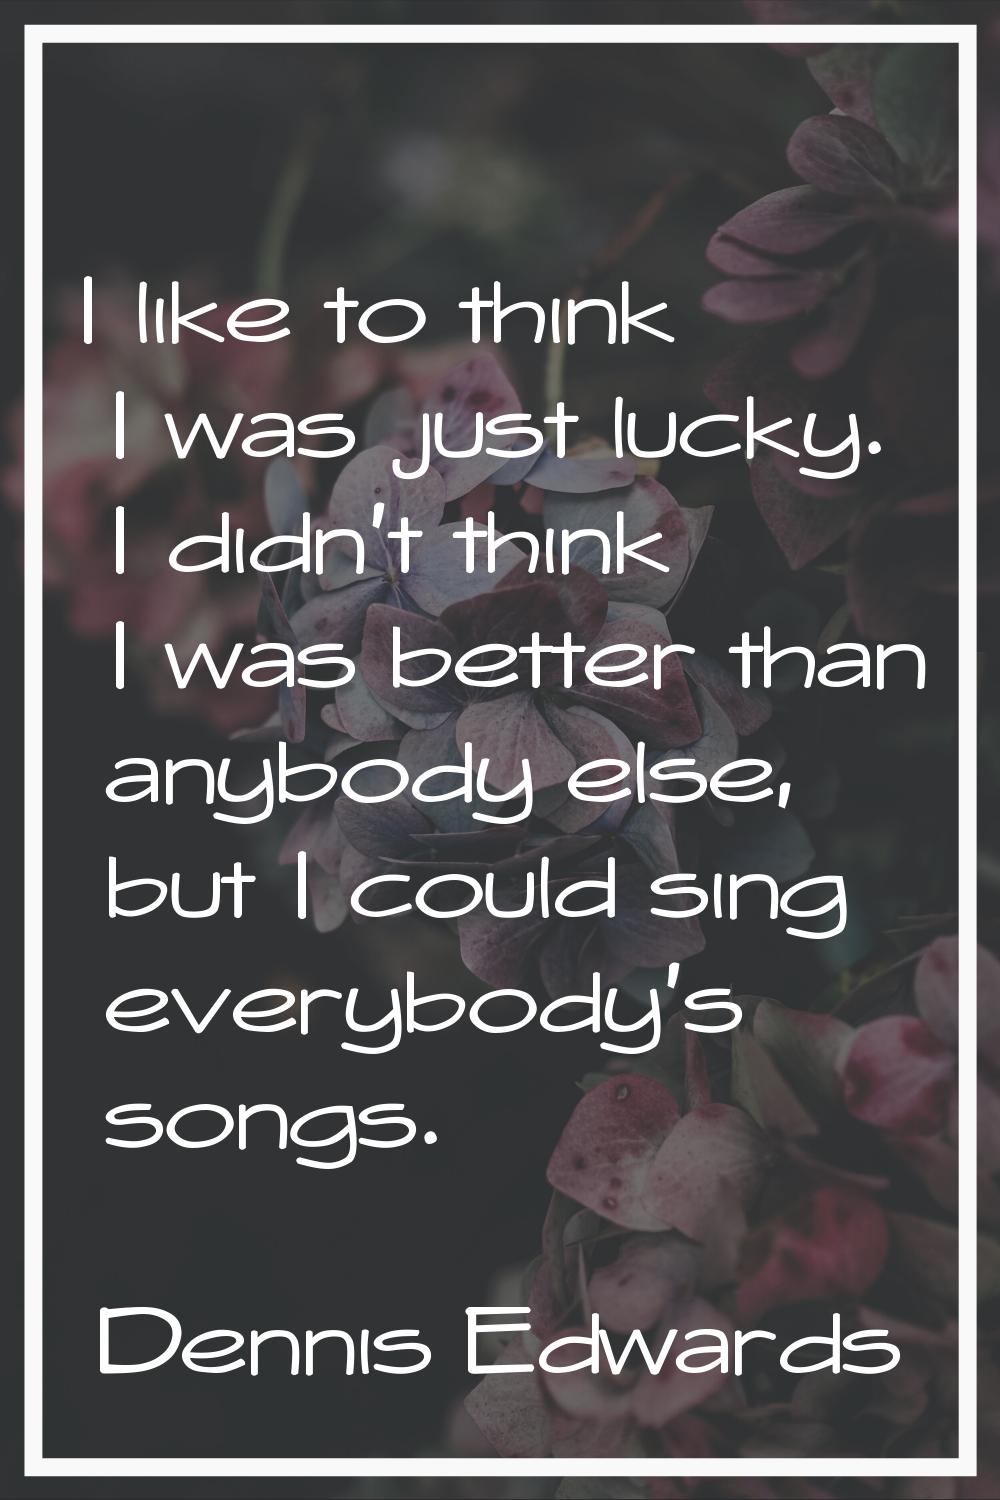 I like to think I was just lucky. I didn't think I was better than anybody else, but I could sing e